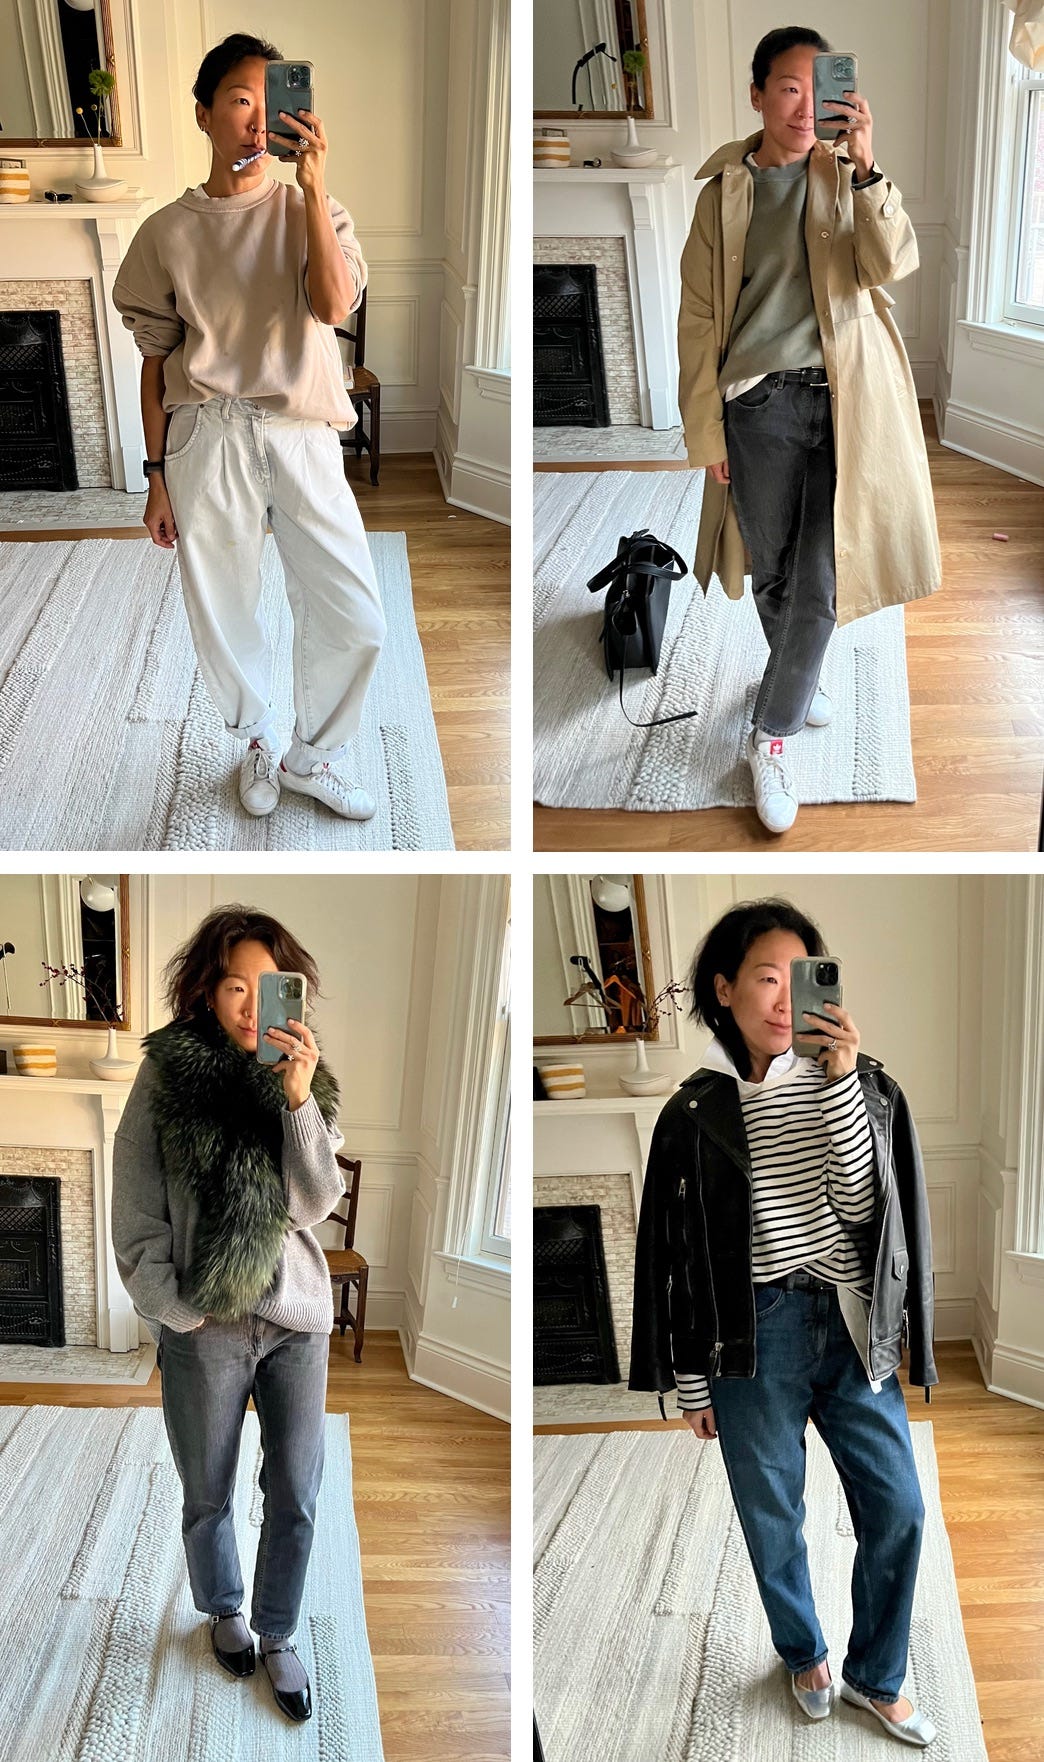 074/ My 52 Coziest Outfits of 2023 - by Irene Kim (김애린)